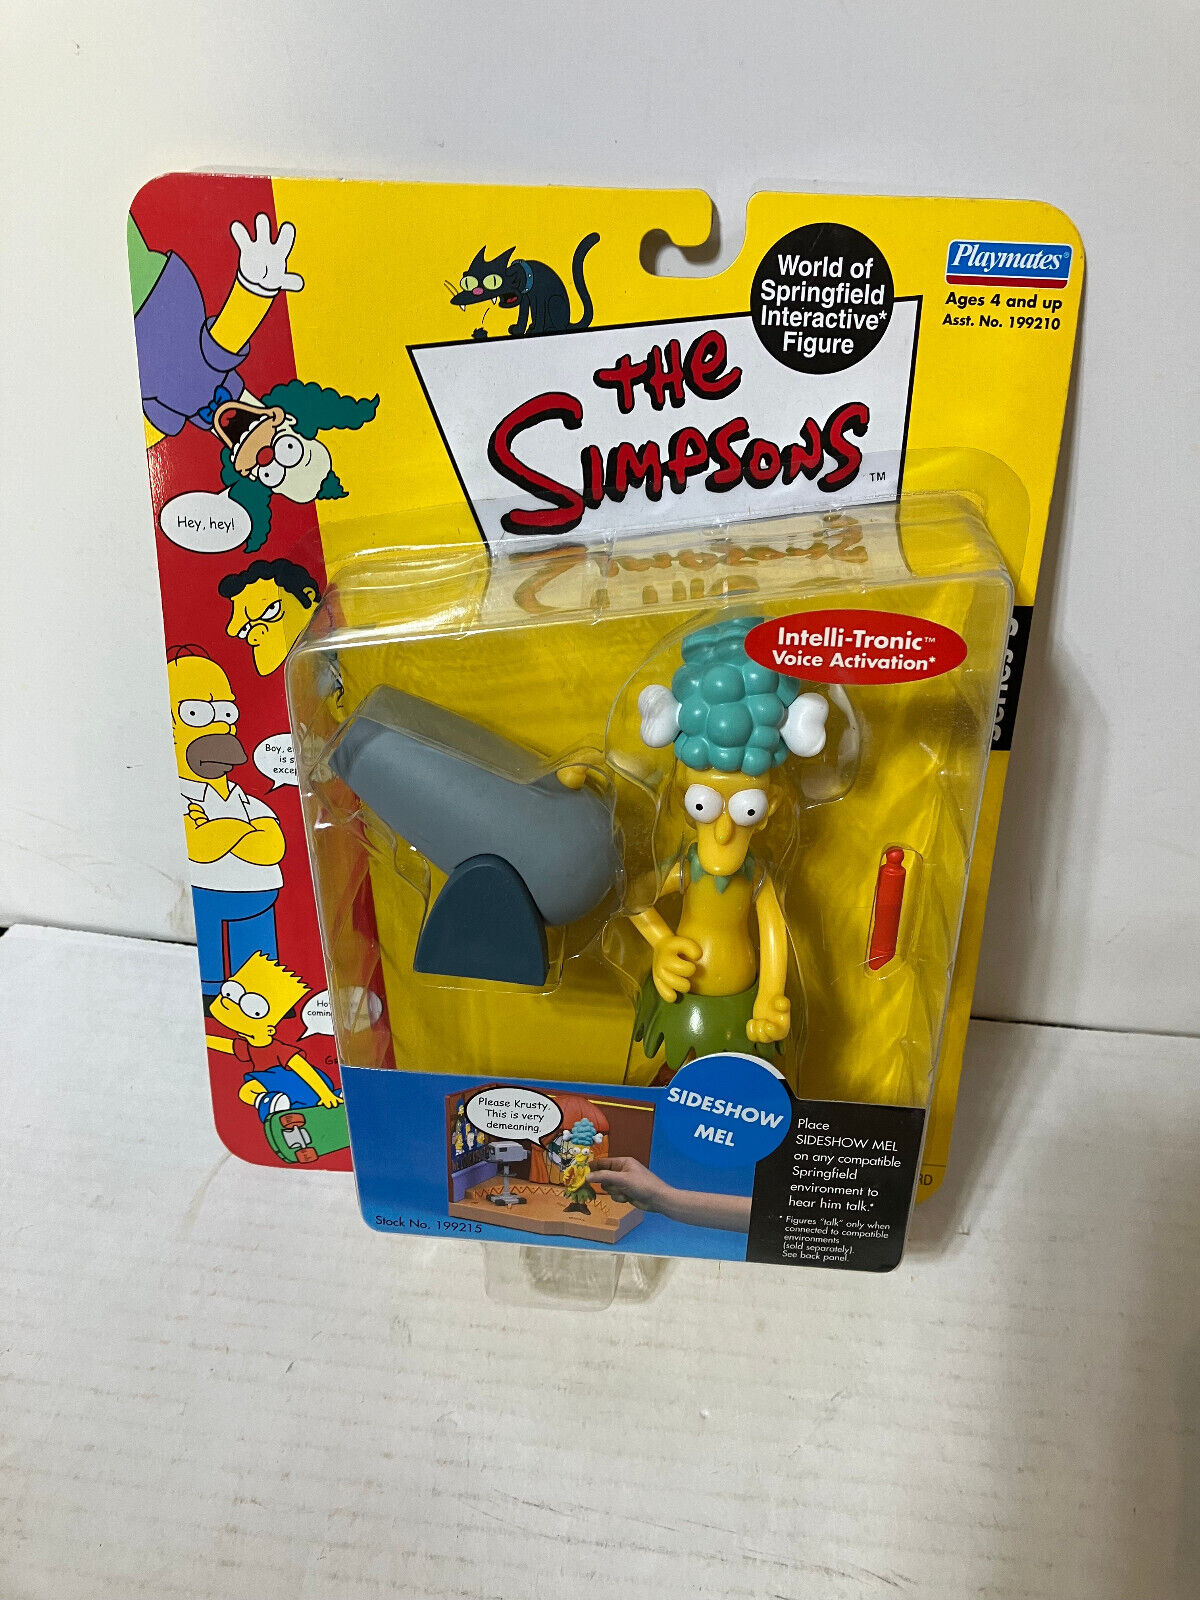 Unbelievable Sideshow Mel The Simpsons Intelli-Tronic Action Figure Series 5 on eBay